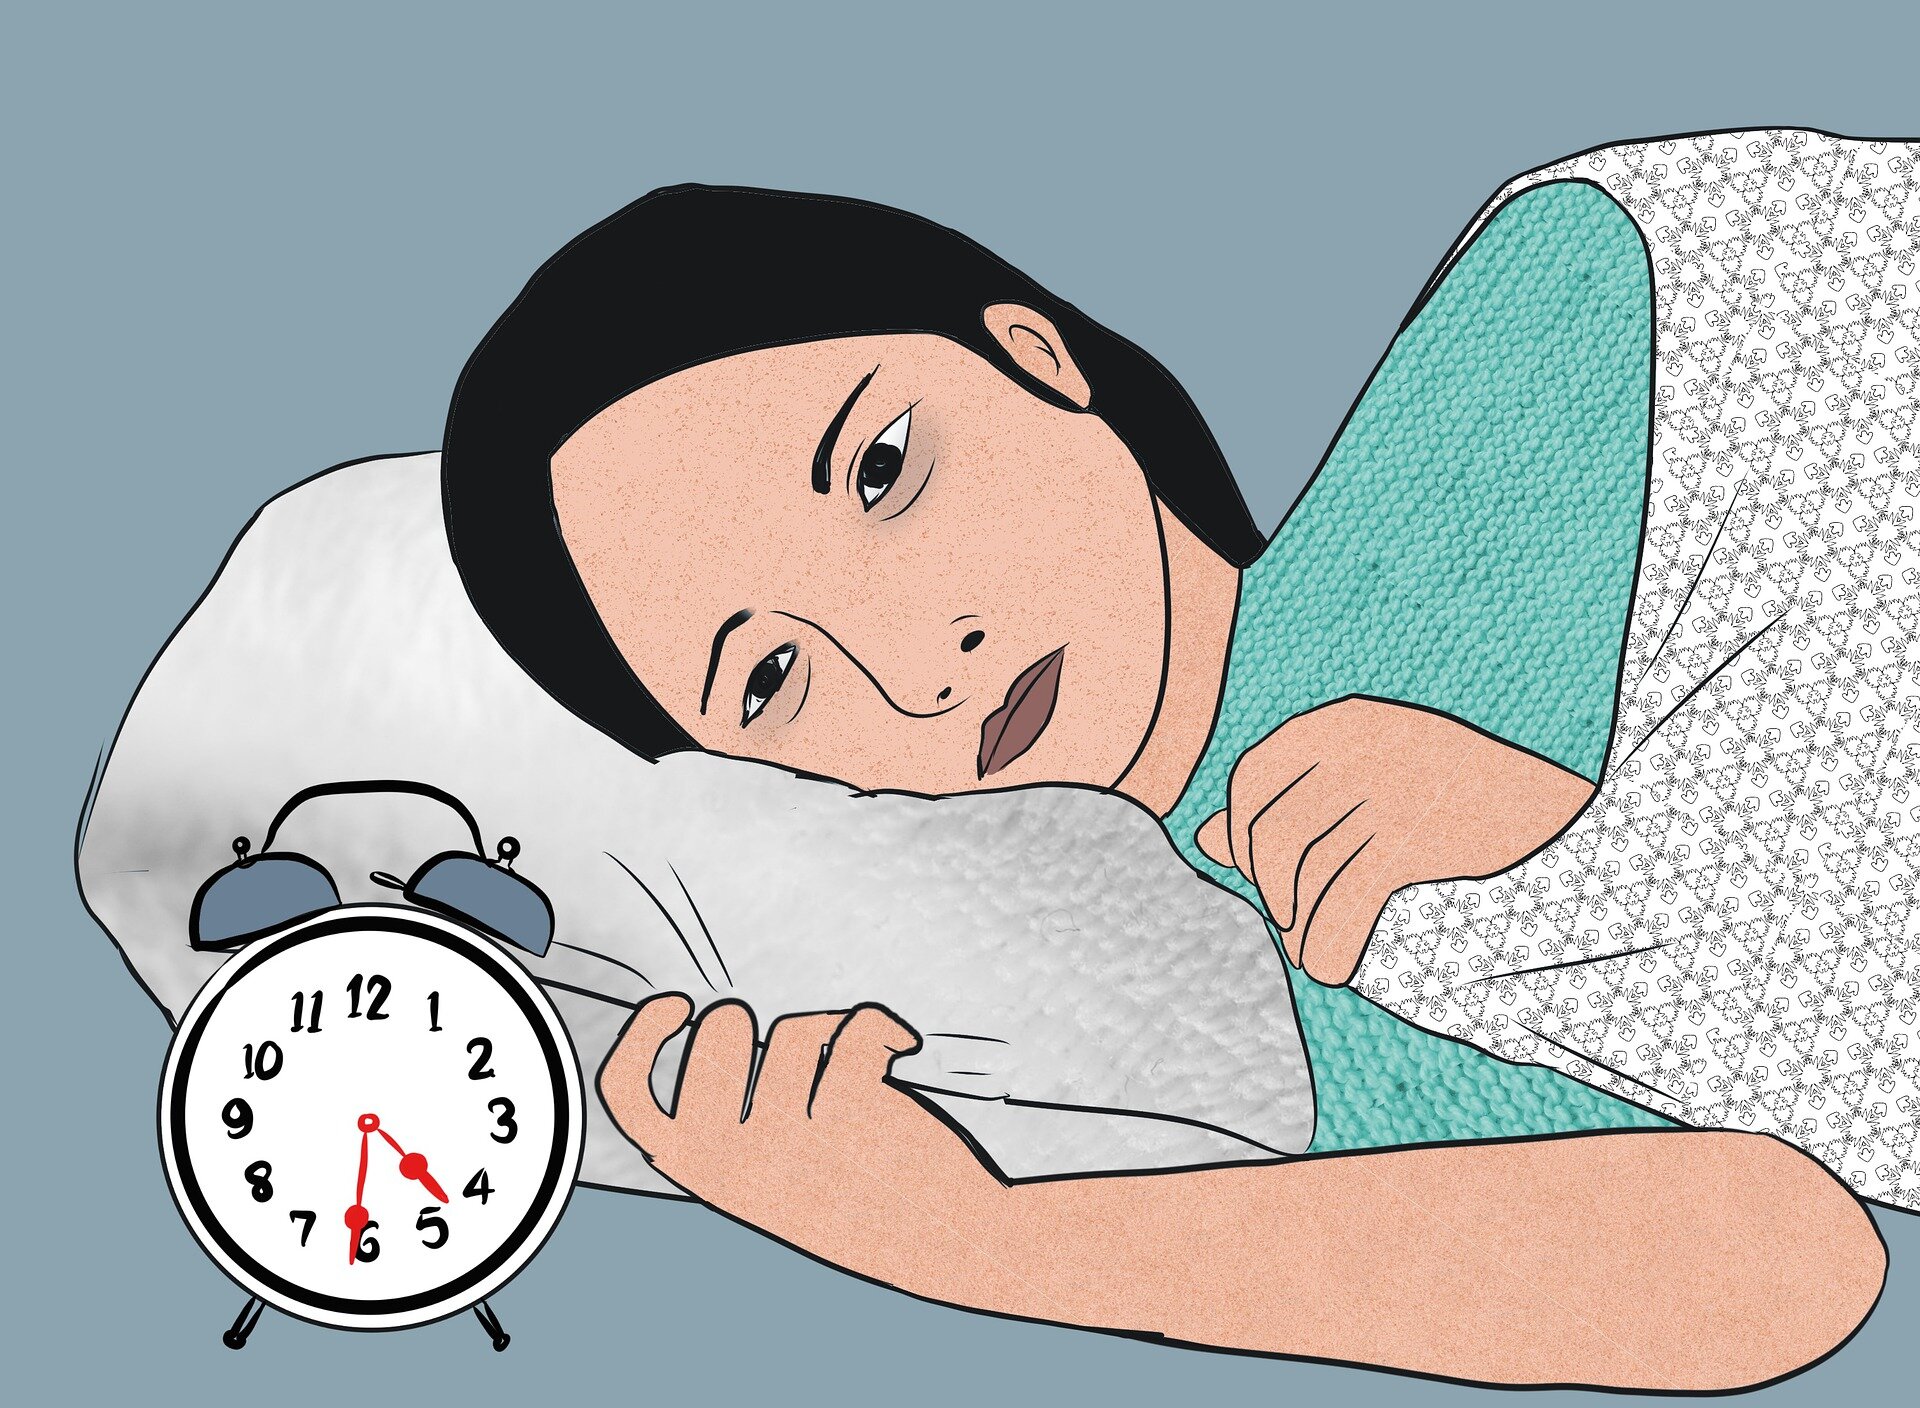 #Insomnia tied to greater risk of heart attack, especially in women